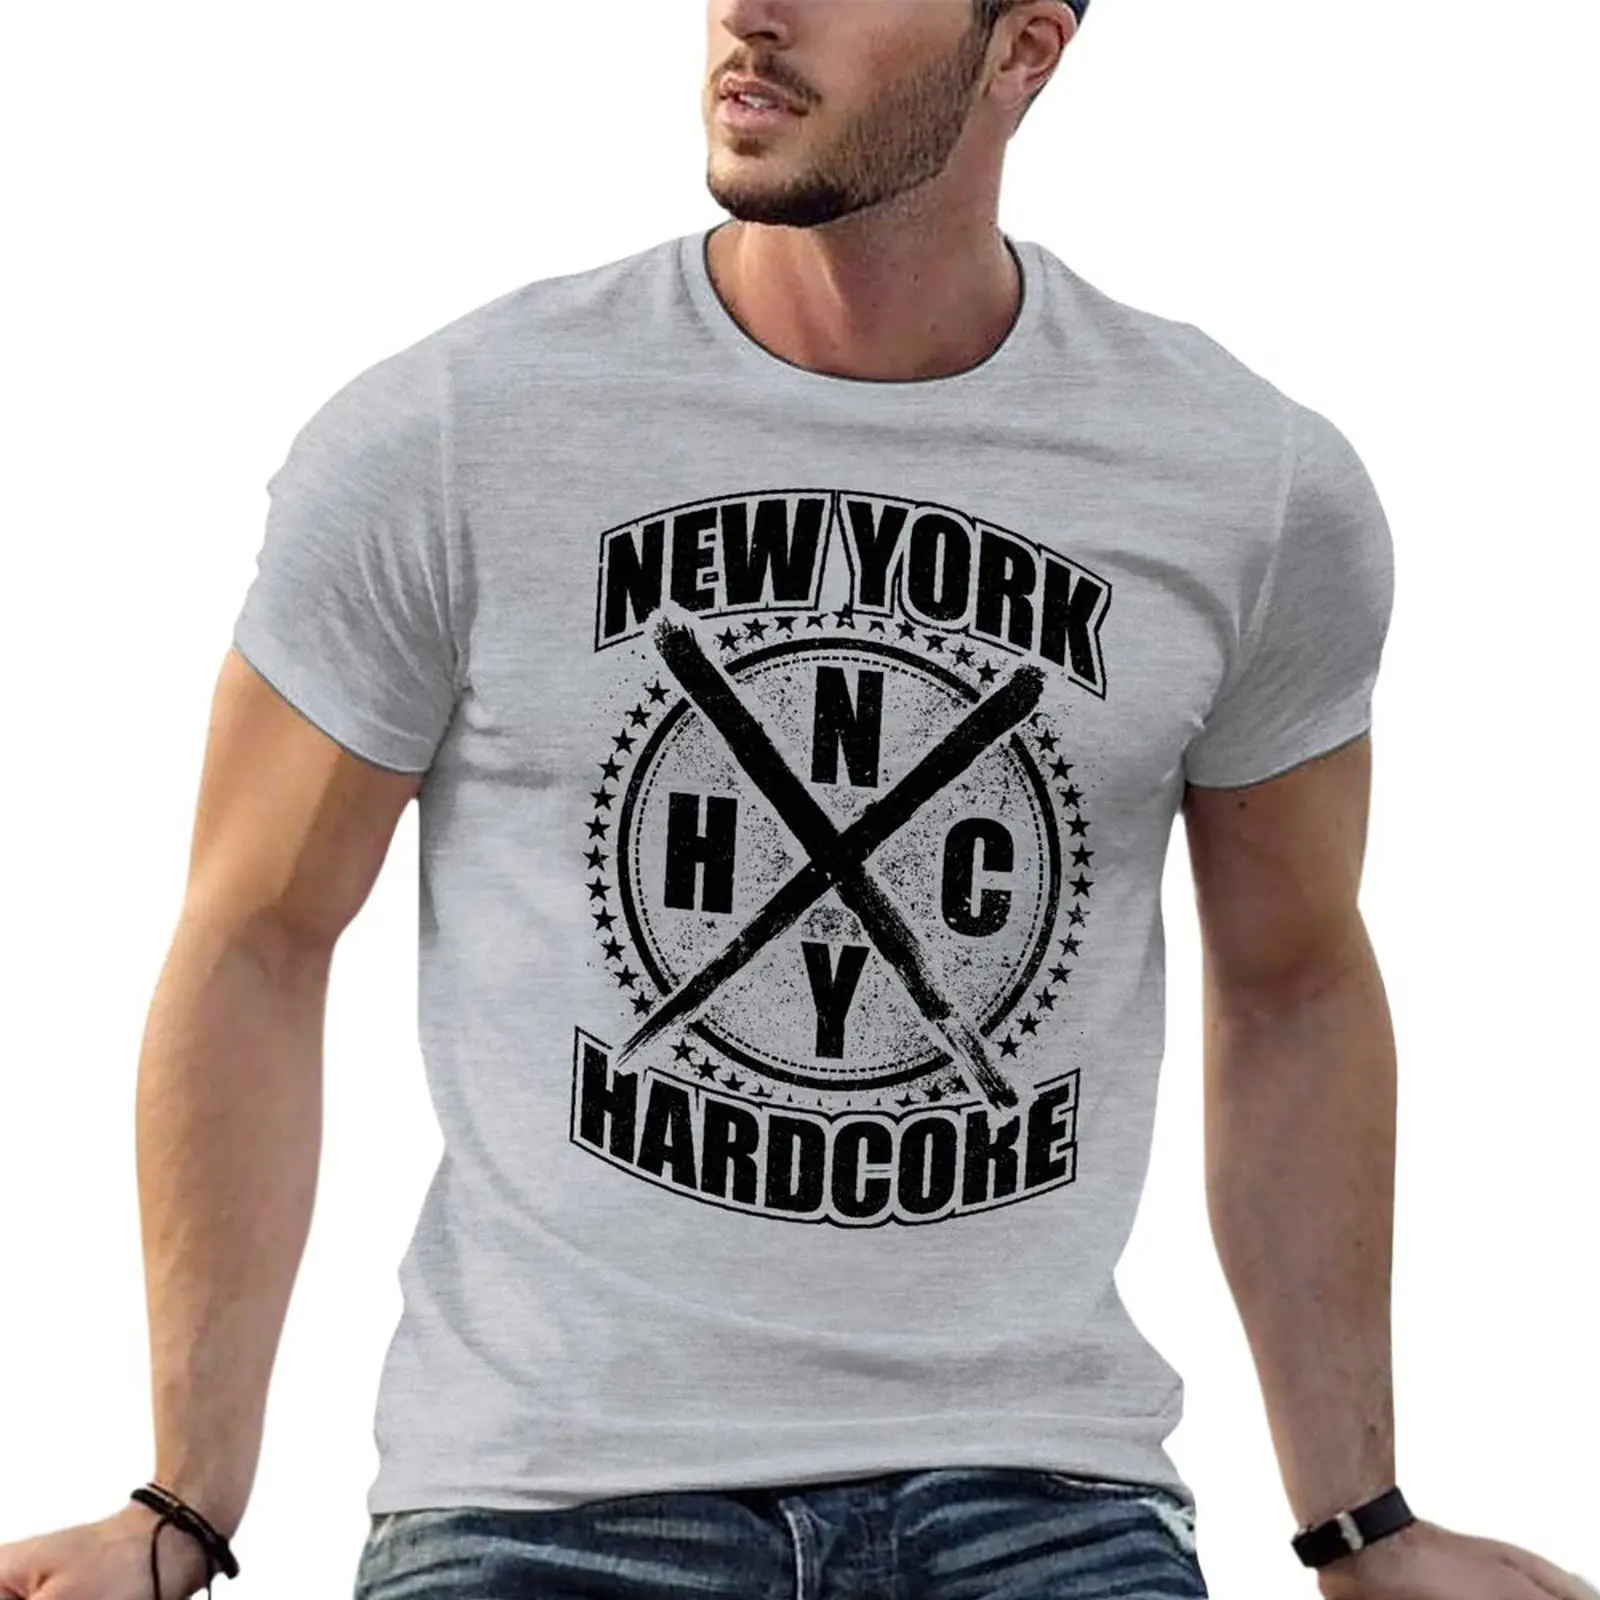 

New York Hardcore Cross - Nyhc Agnostic Front Madball Oversize T-Shirts Branded Men Clothing 100% Cotton Streetwear Big Size Top